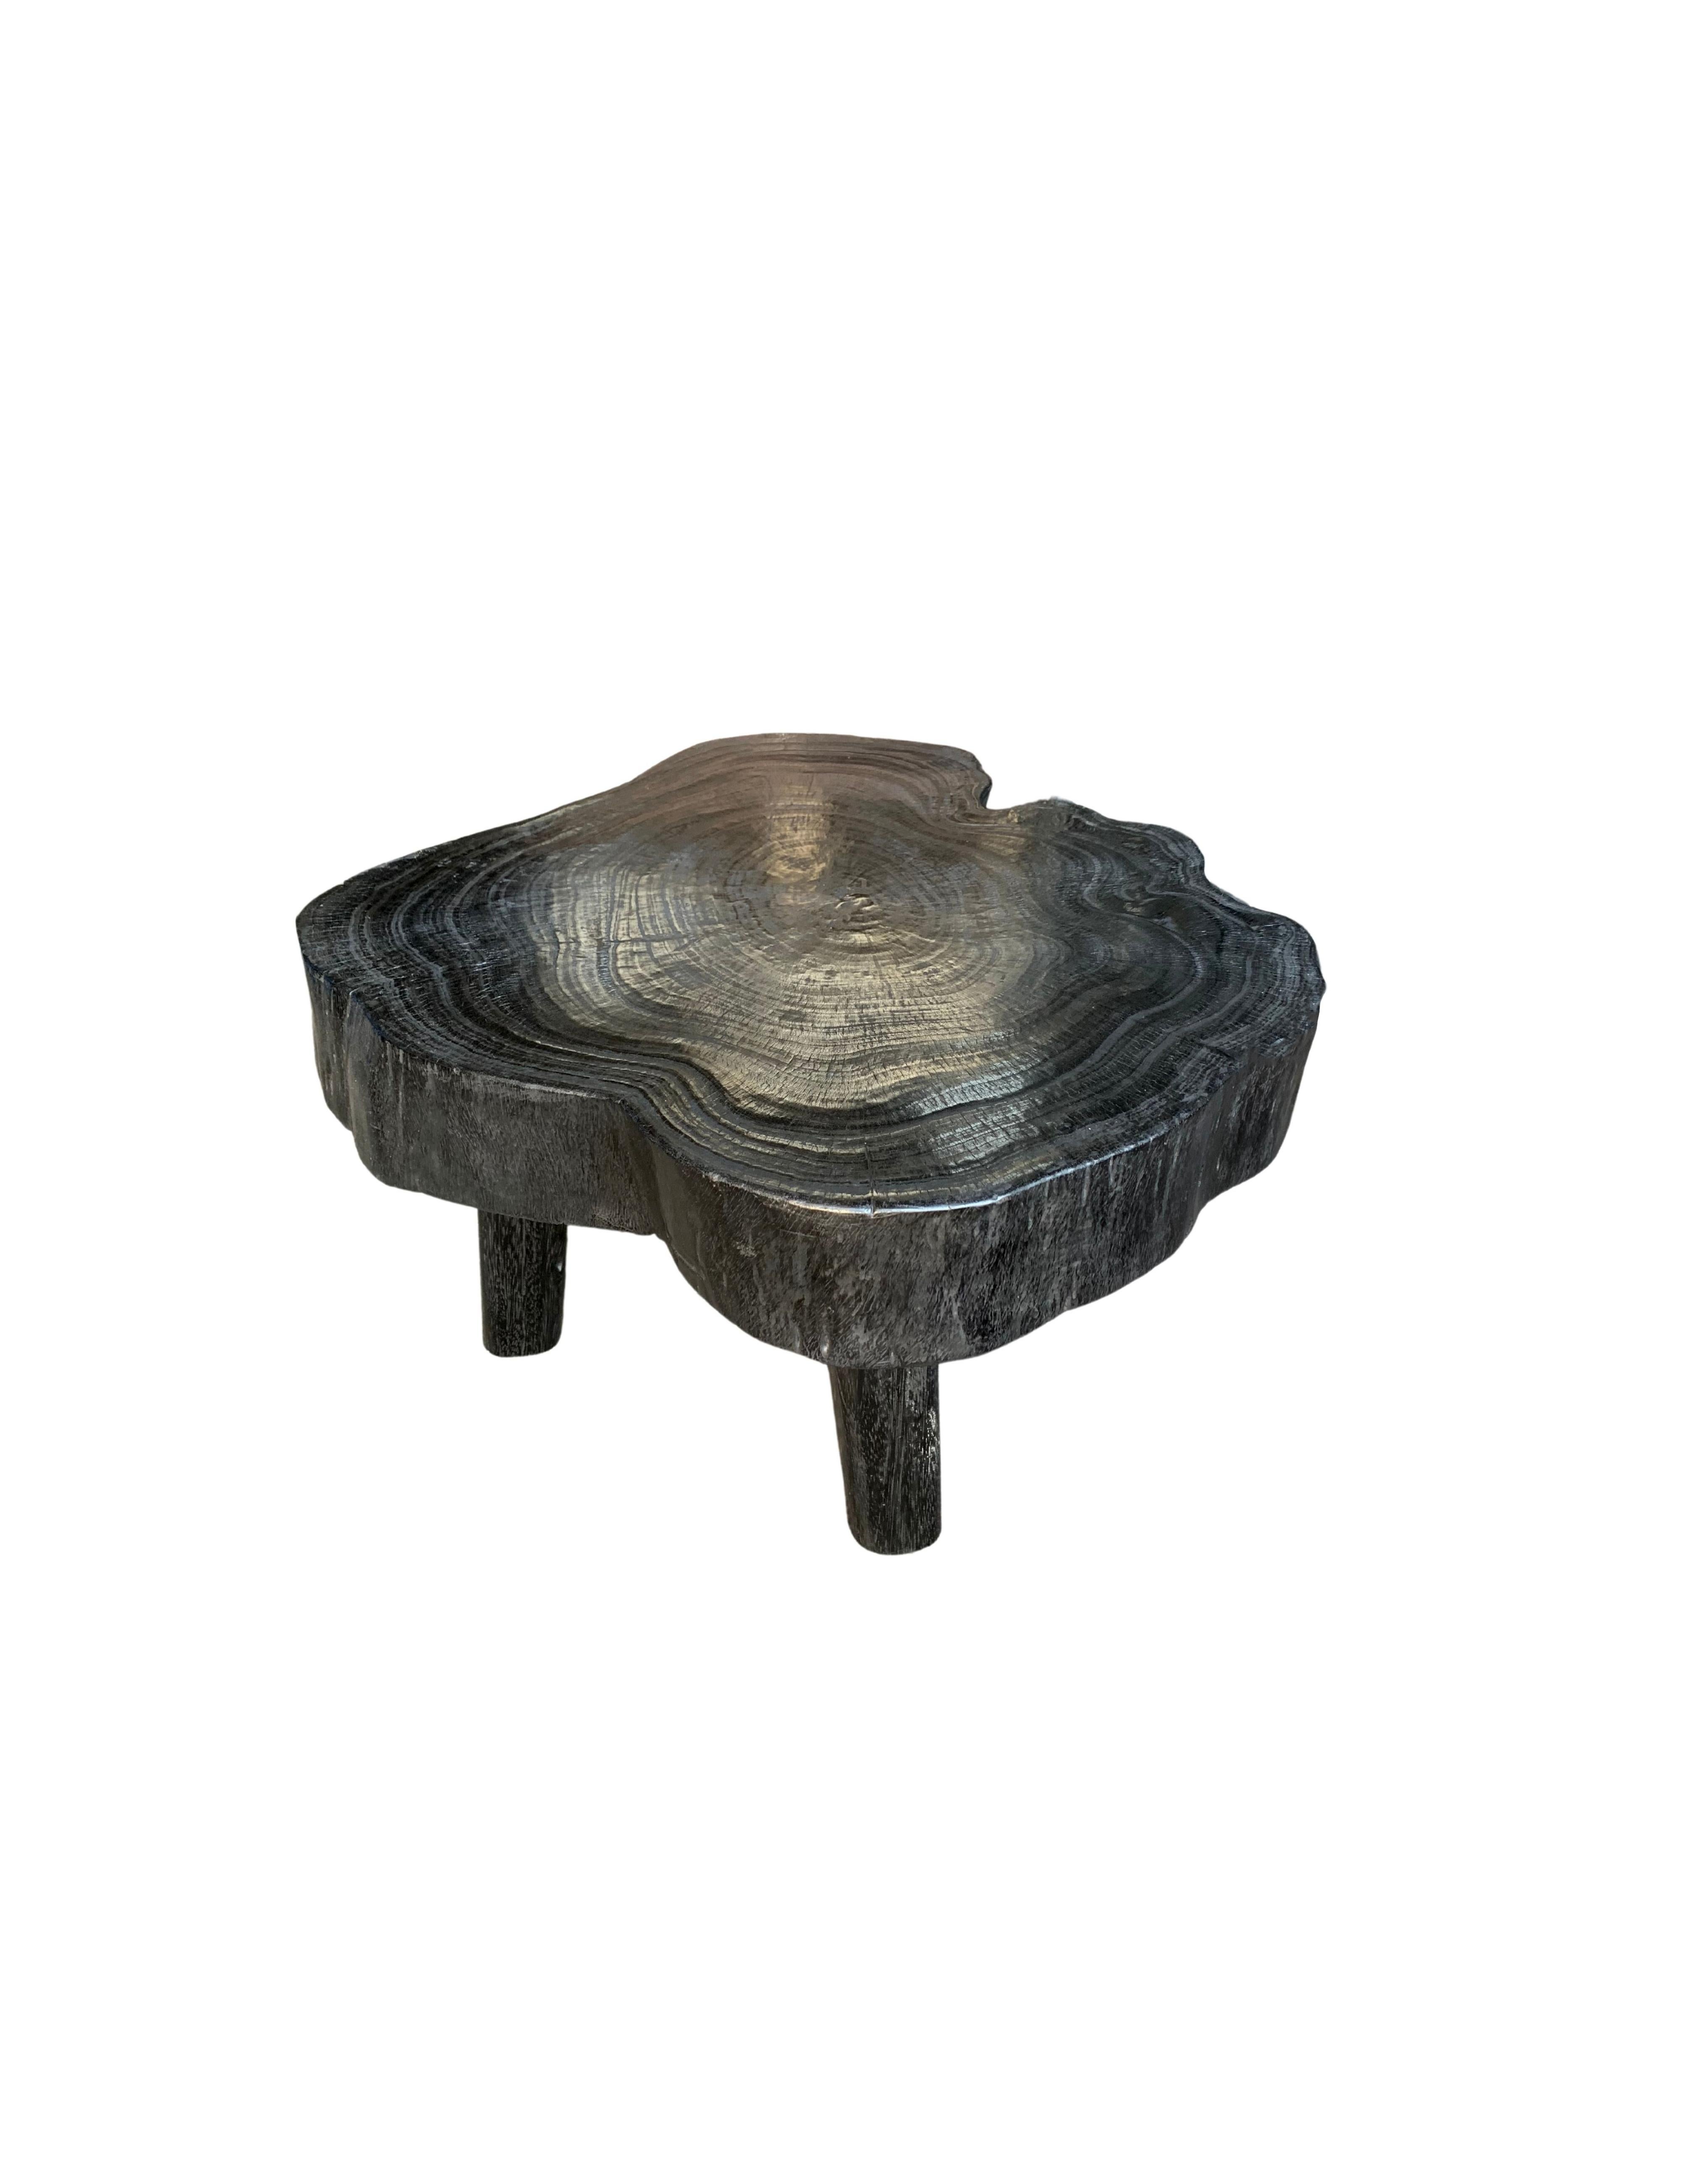 A wonderfully sculptural side table with an organic form. Its stark black pigment was achieved through burning the wood three times. Its neutral pigment and wood texture makes it perfect for any space. A uniquely sculptural and versatile piece